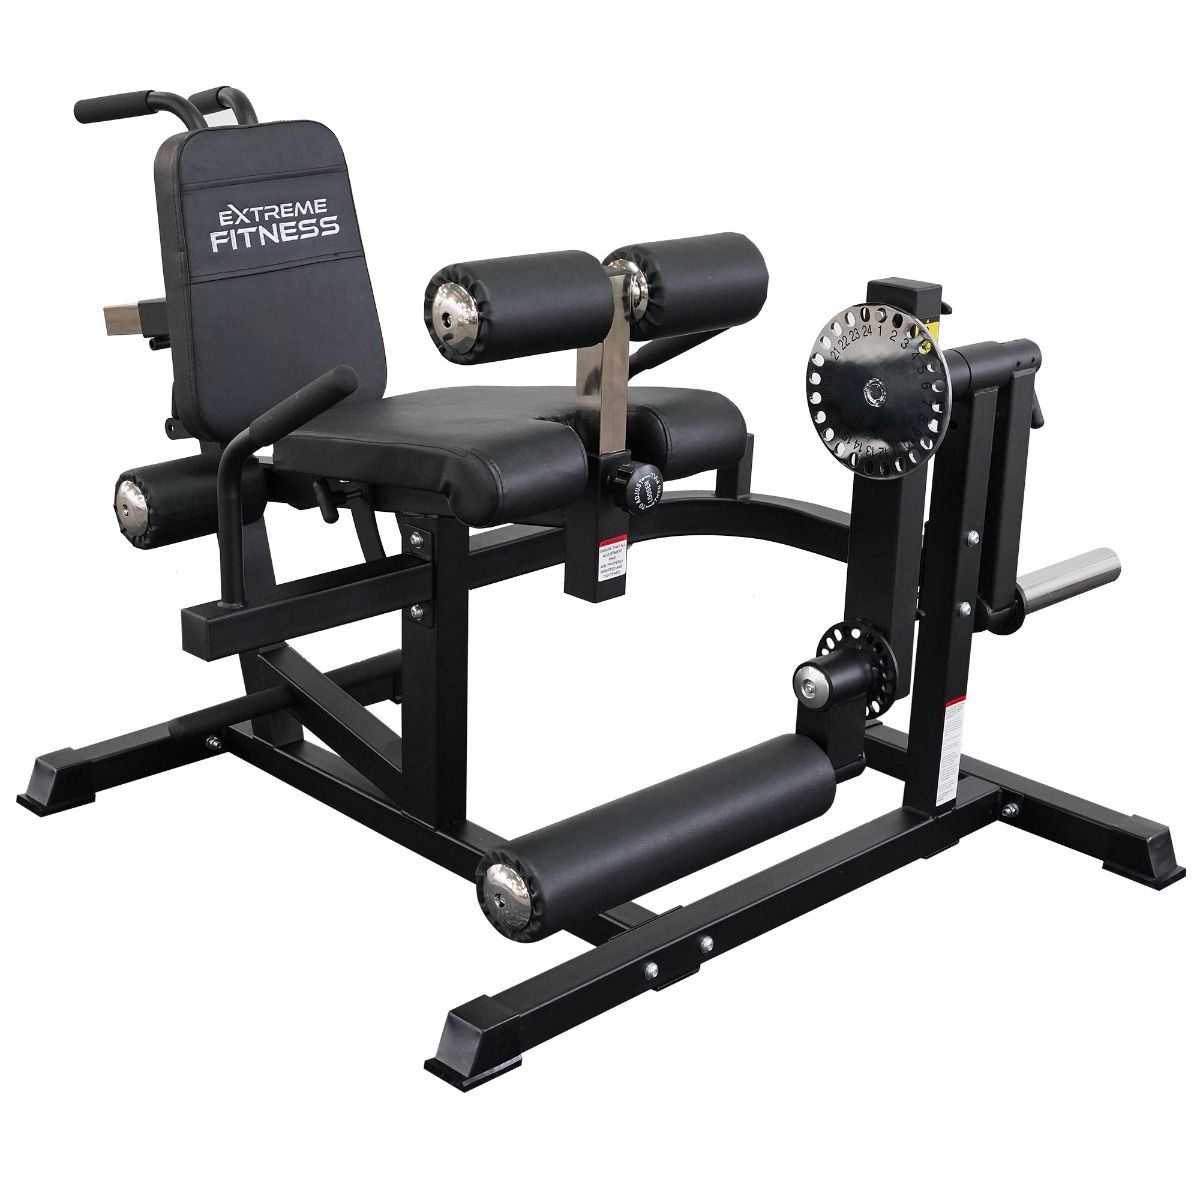 EXTREME FITNESS LEG CURL / EXTENSION MACHINE - Extreme Fitness